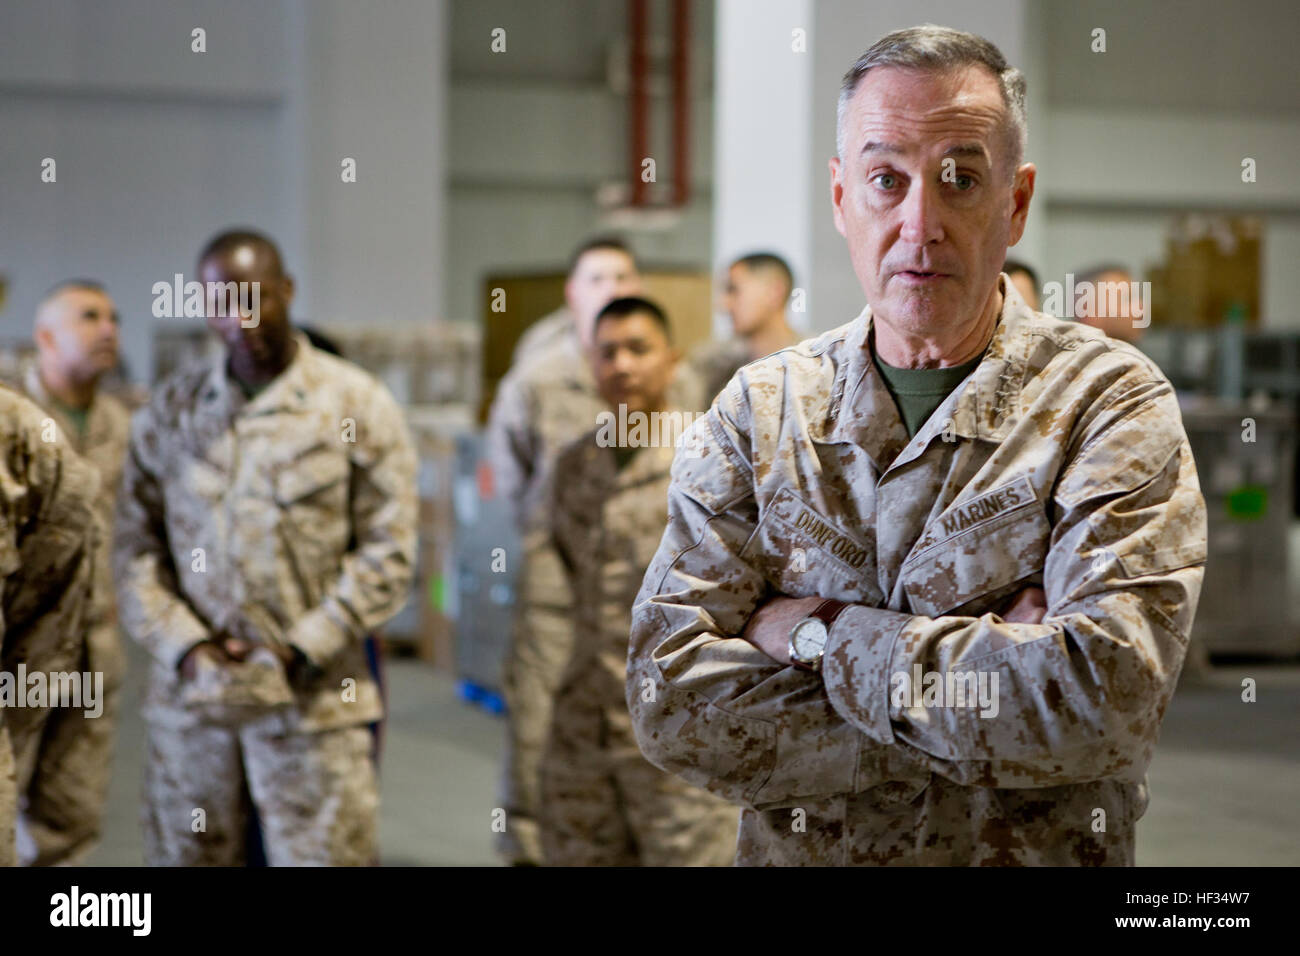 Gen. Joseph Dunford, Commandant of the Marine Corps, and Sgt. Maj. Ronald Green, Sergeant Major of the Marine Corps, paid a visit to the service members aboard Marine Corps Air Station Iwakuni, Japan, March 24, 2015. During their visit, Dunford and Green conducted an all-hands brief and toured some of the units aboard station including Marine All-Weather Fighter Attack Squadron 242 and Marine Aviation Logistics Squadron 12. Dunford also spoke to service members about the issues pertaining to the current state of the Marine Corps and his plans to improve it while fielding questions the service  Stock Photo